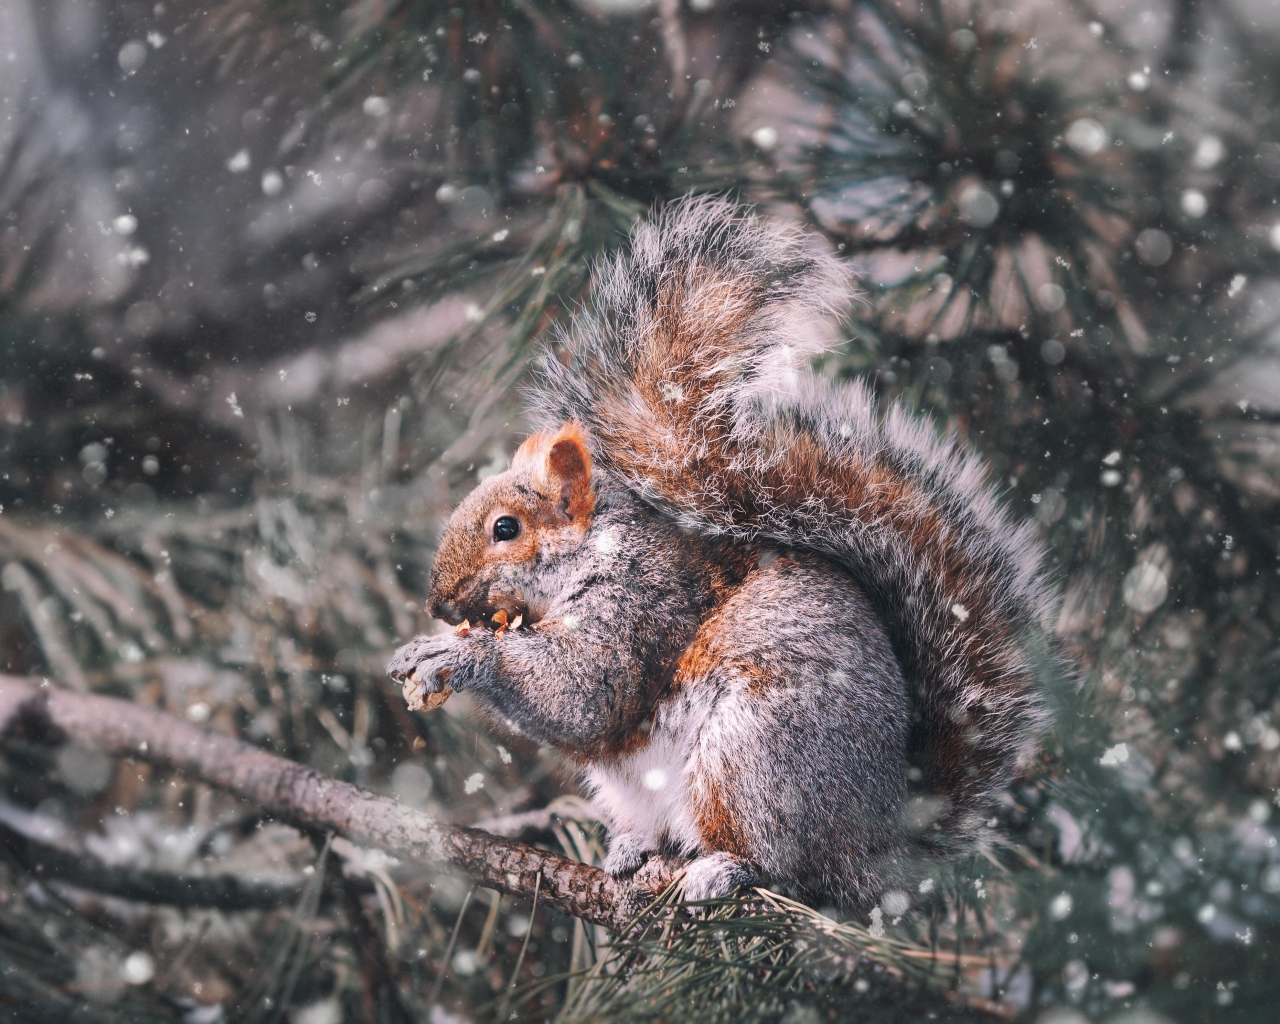 Squirrel gnaws a nut on a pine branch in winter